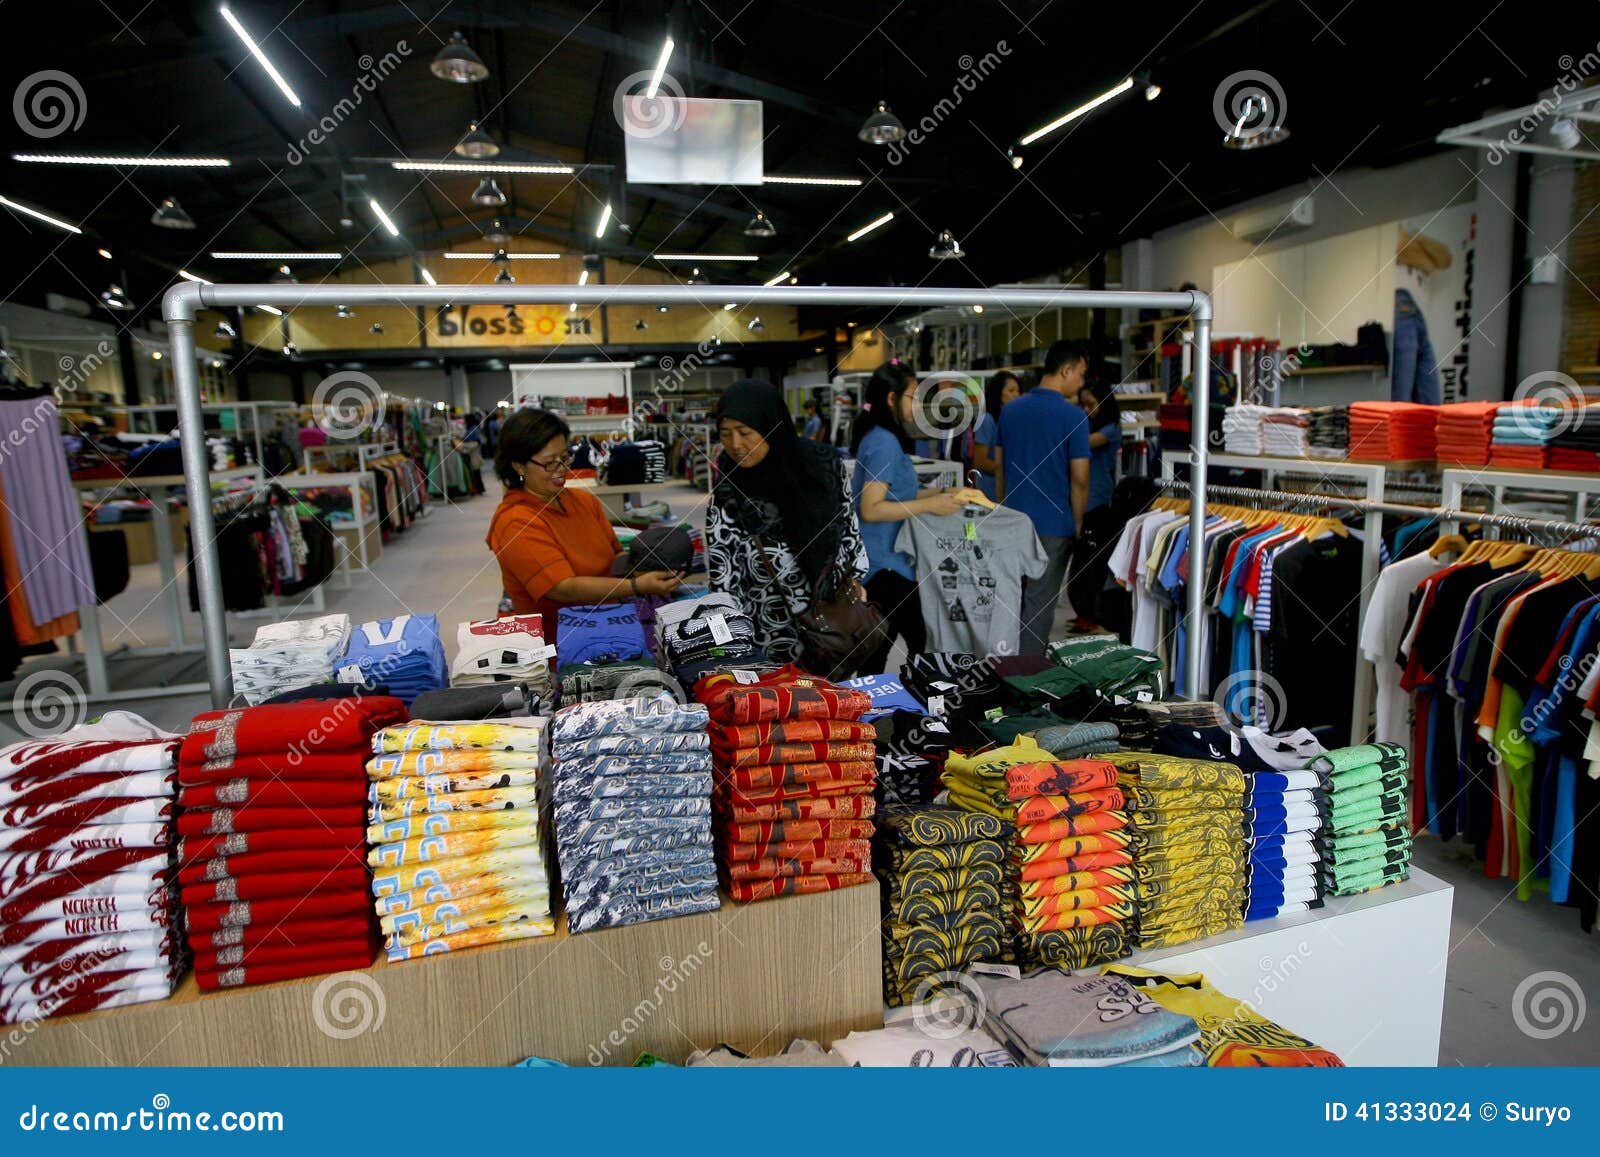 Factory outlet editorial stock image. Image of solo ...